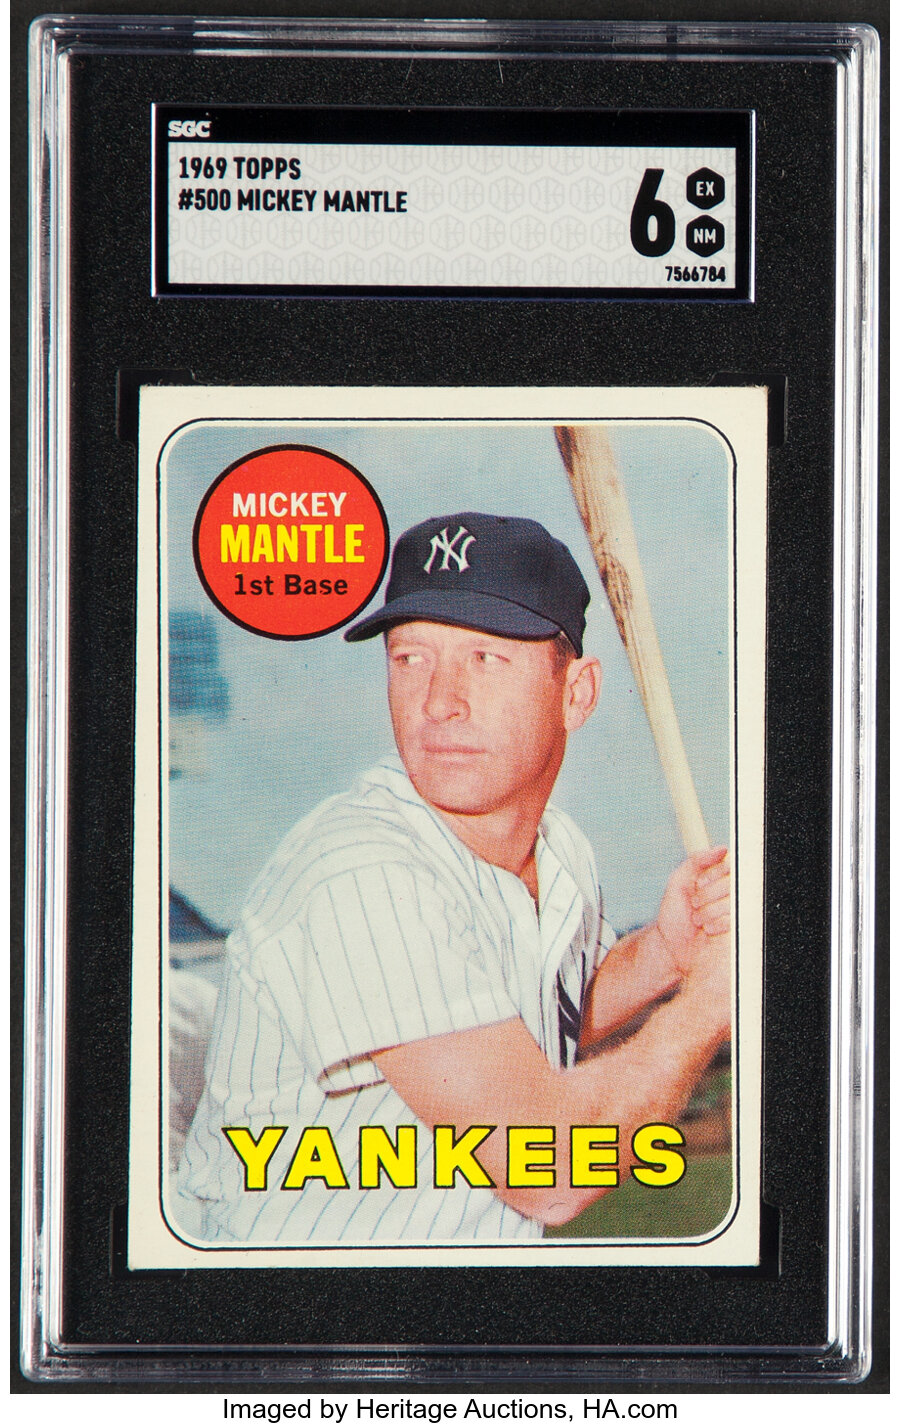 1969 Topps Mickey Mantle (Last Name In Yellow) #500 SGC EX/NM 6